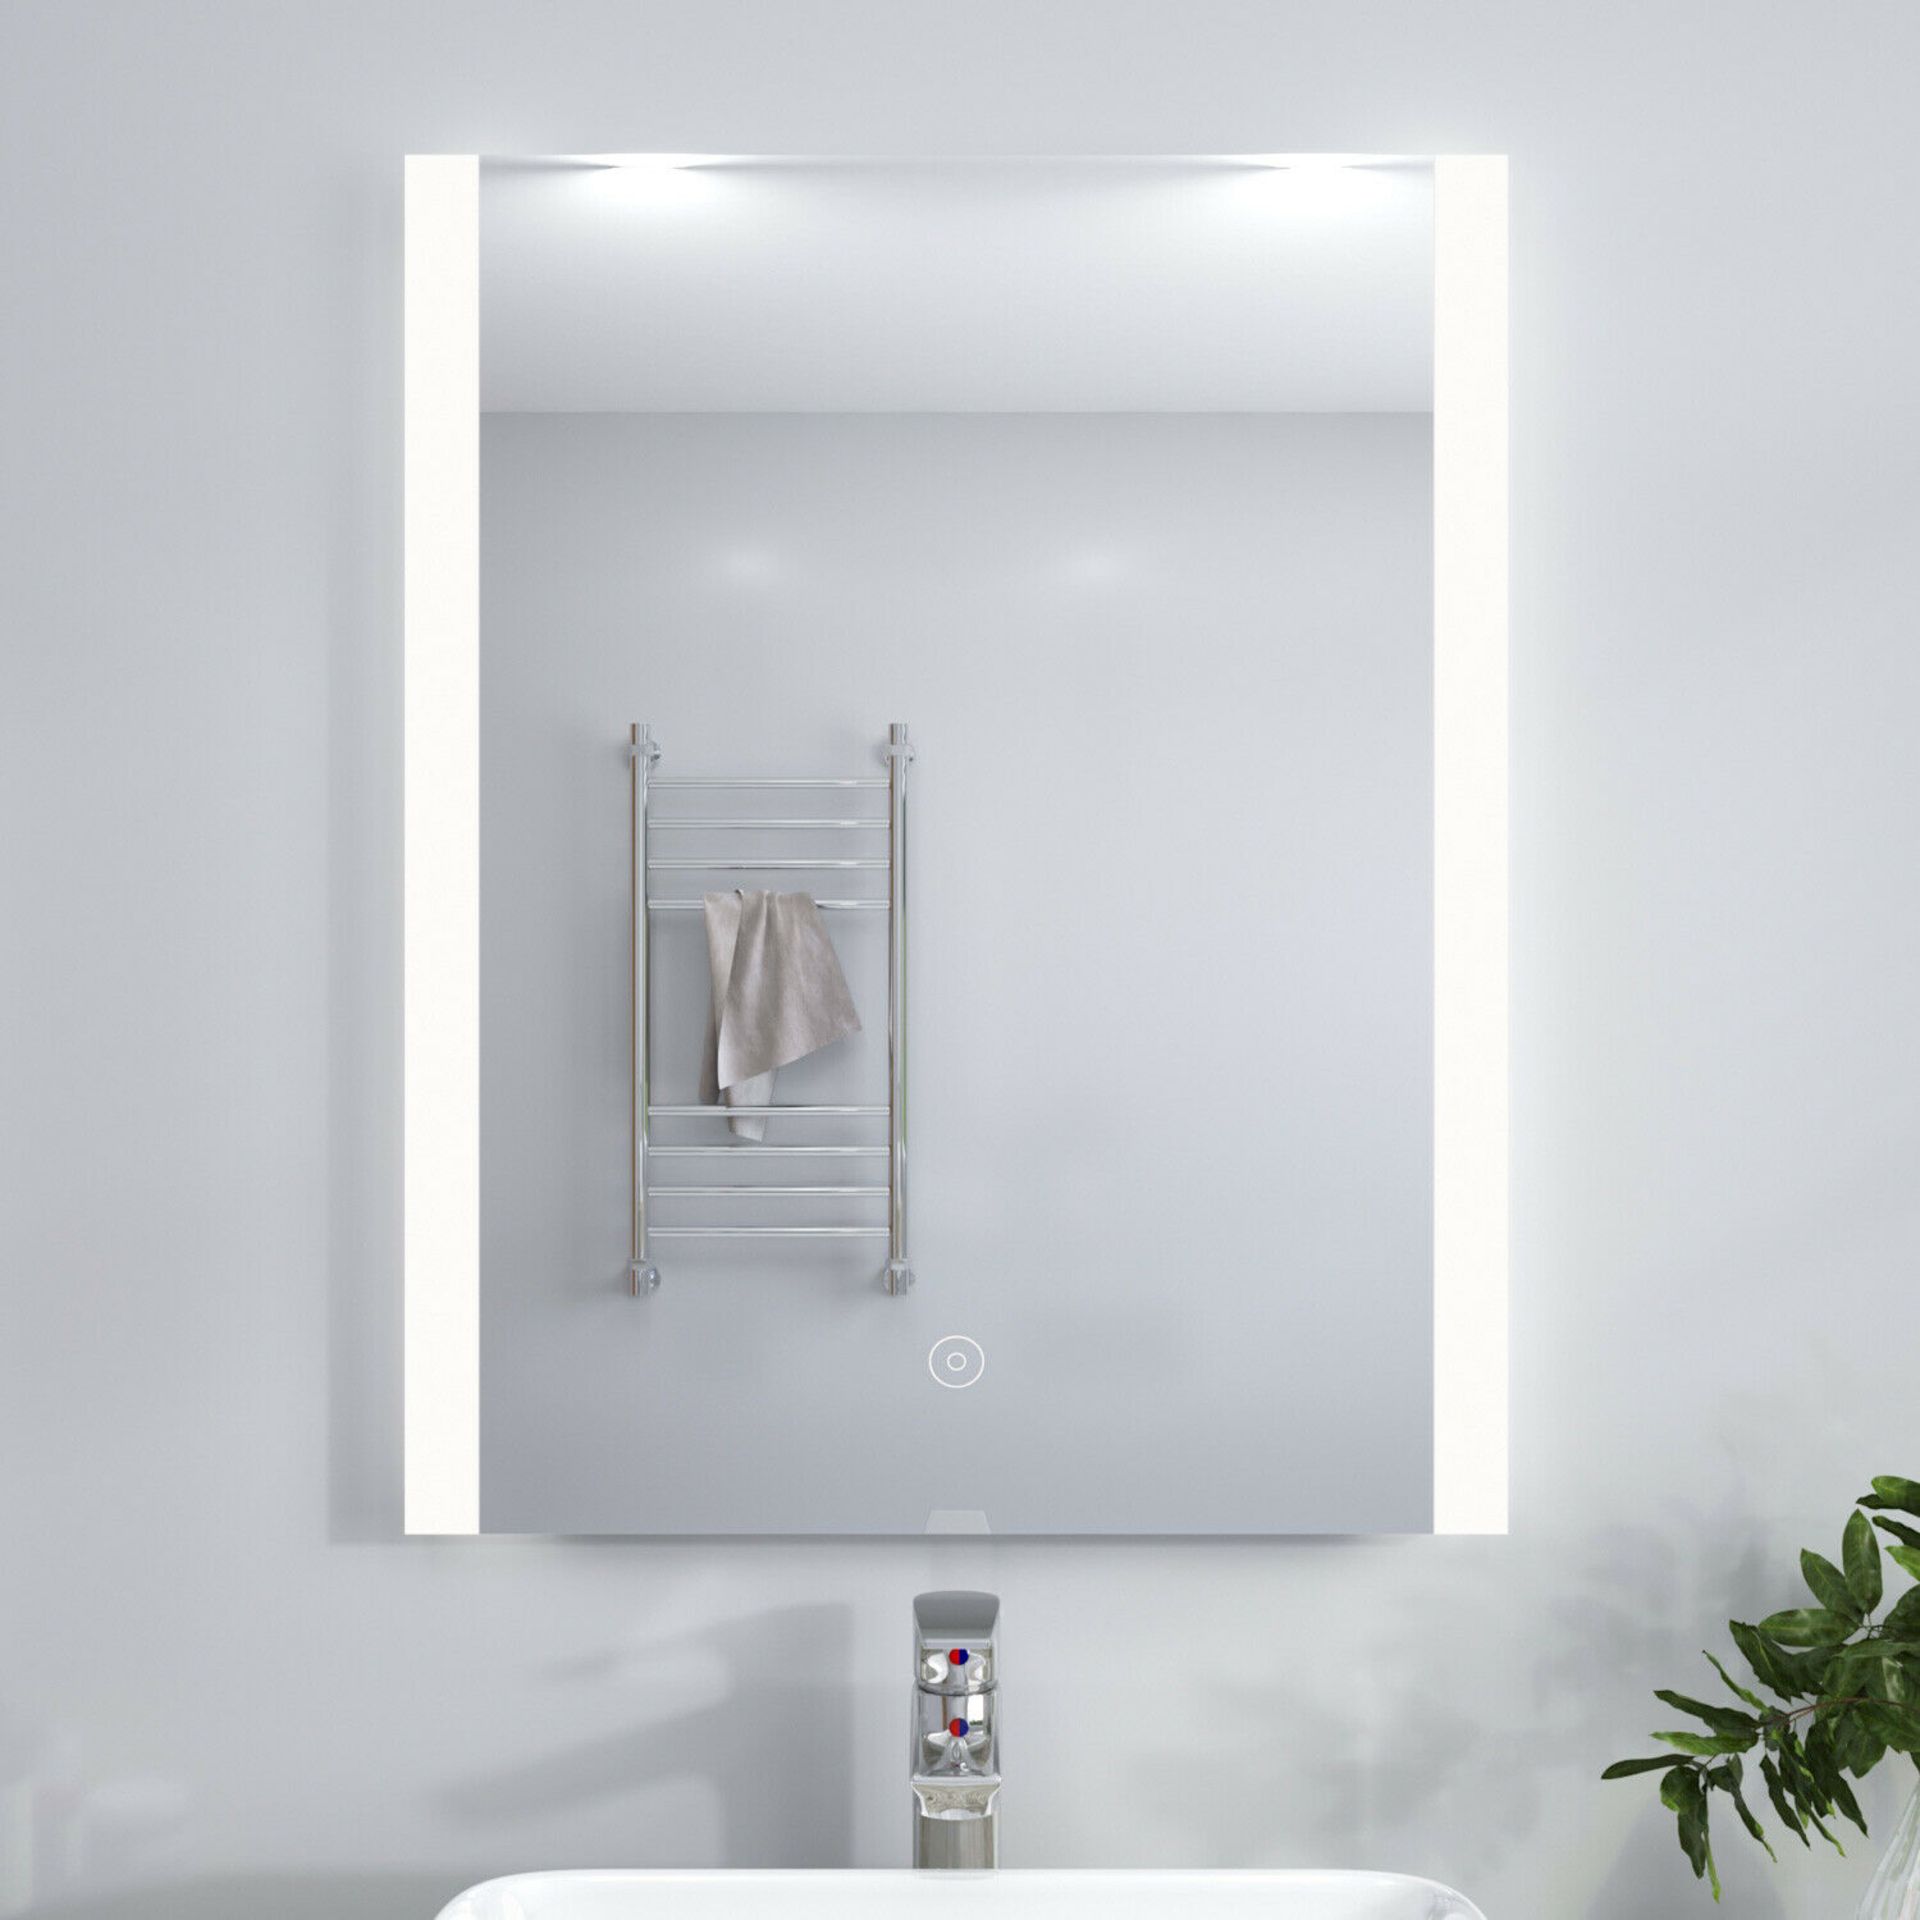 (KN82) 600x800mm Cosmic LED Illuminated Bathroom Mirror. We love this mirror as it provides a w... - Image 2 of 3